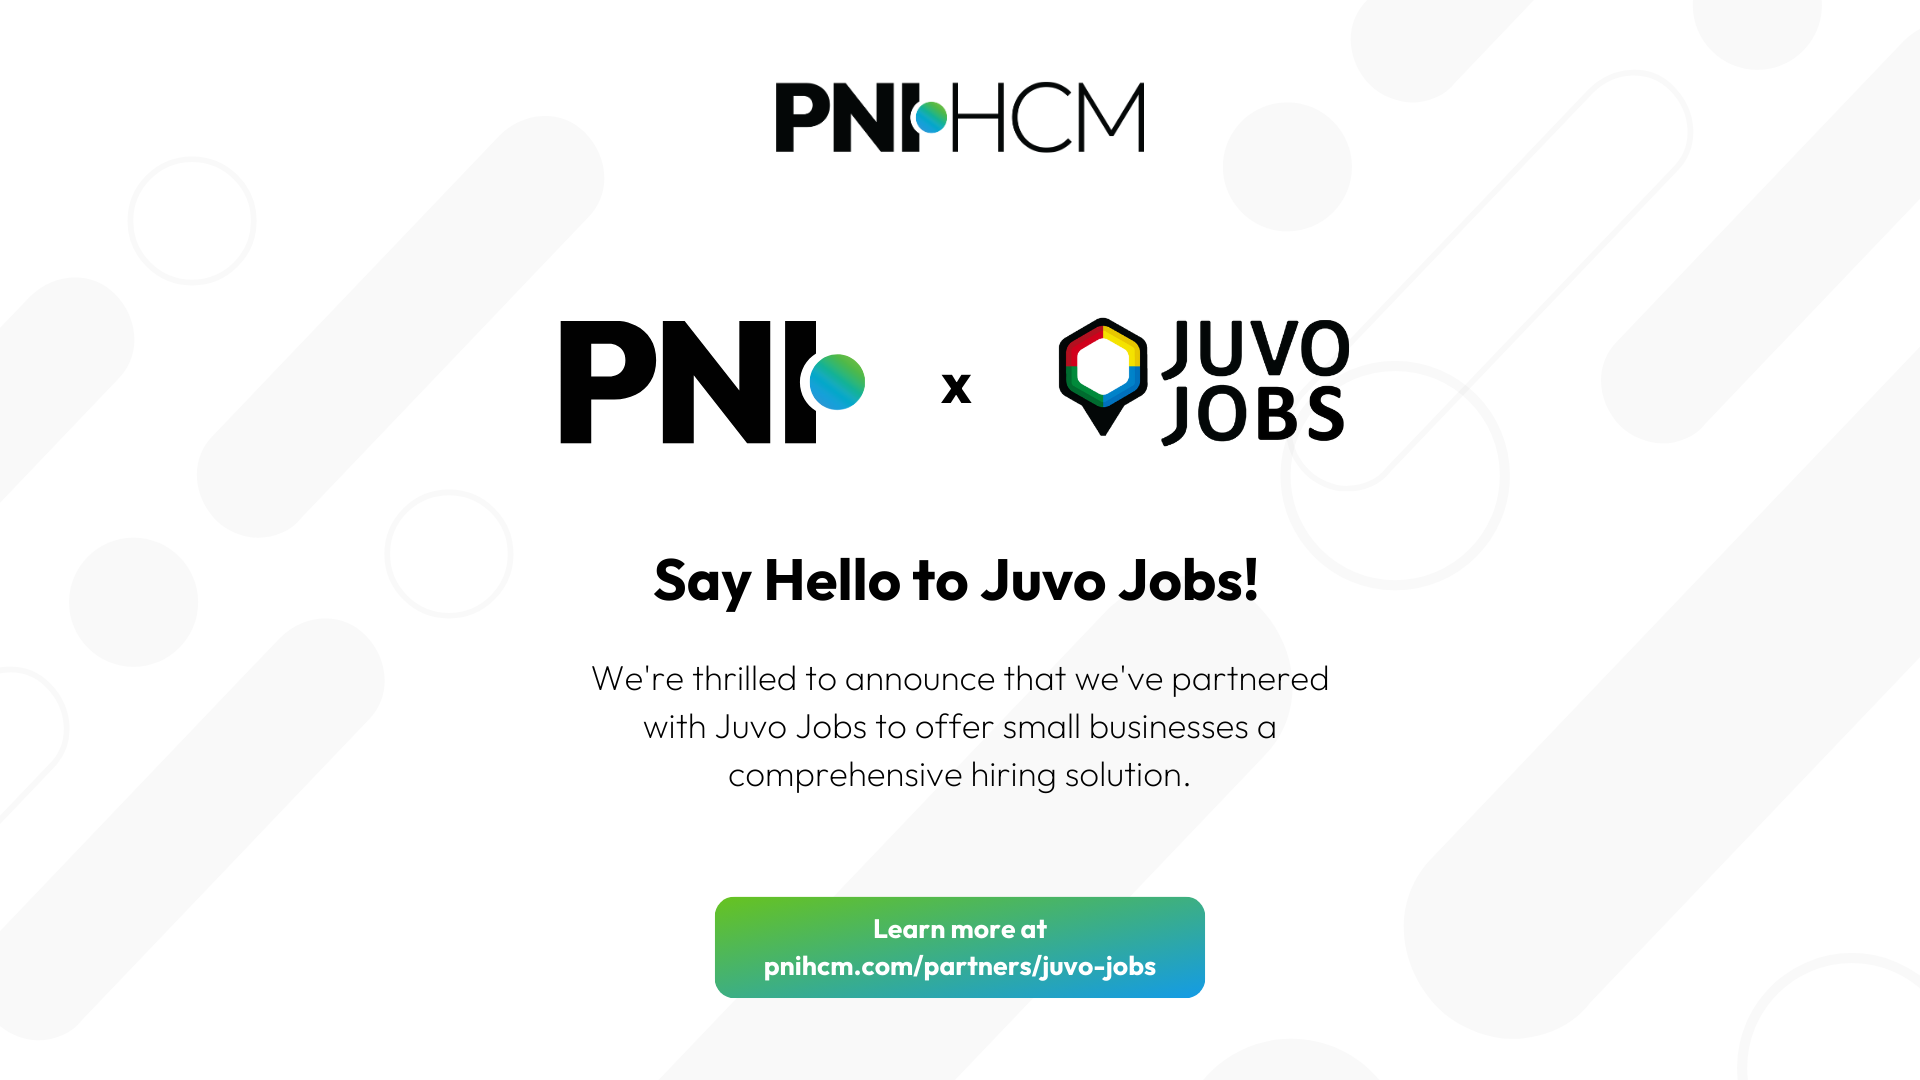 PNI•HCM partners with Juvo Jobs 